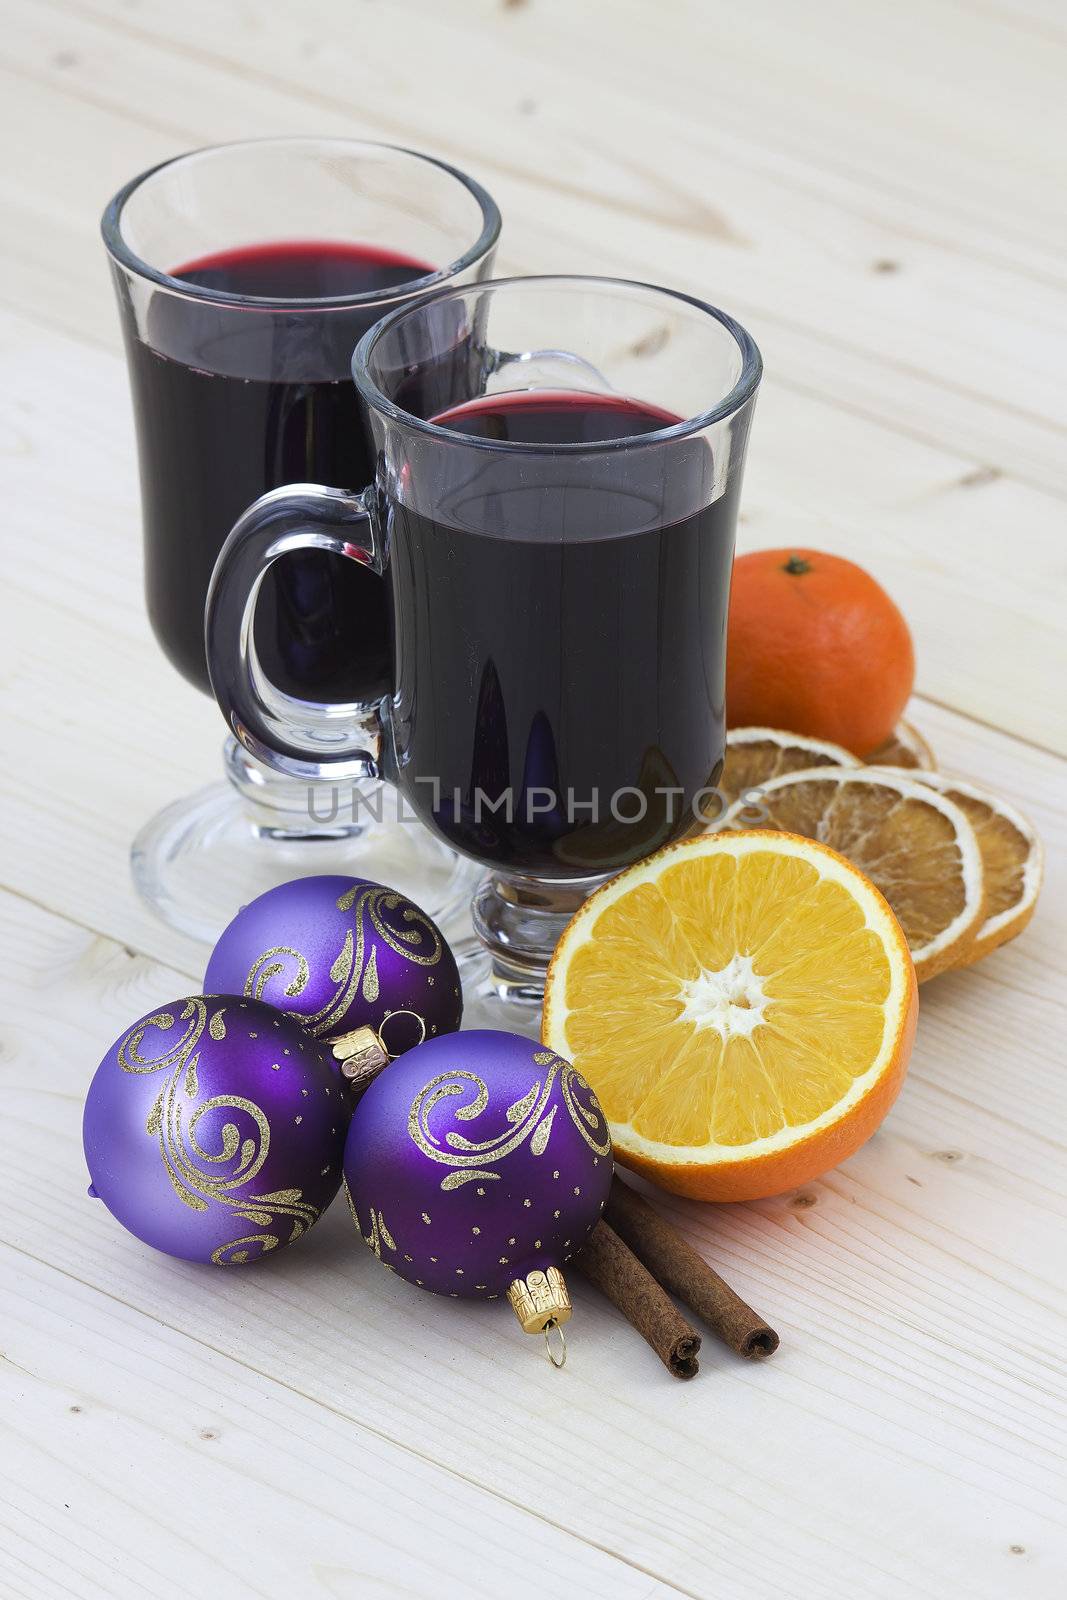 hot wine and christmas decoration